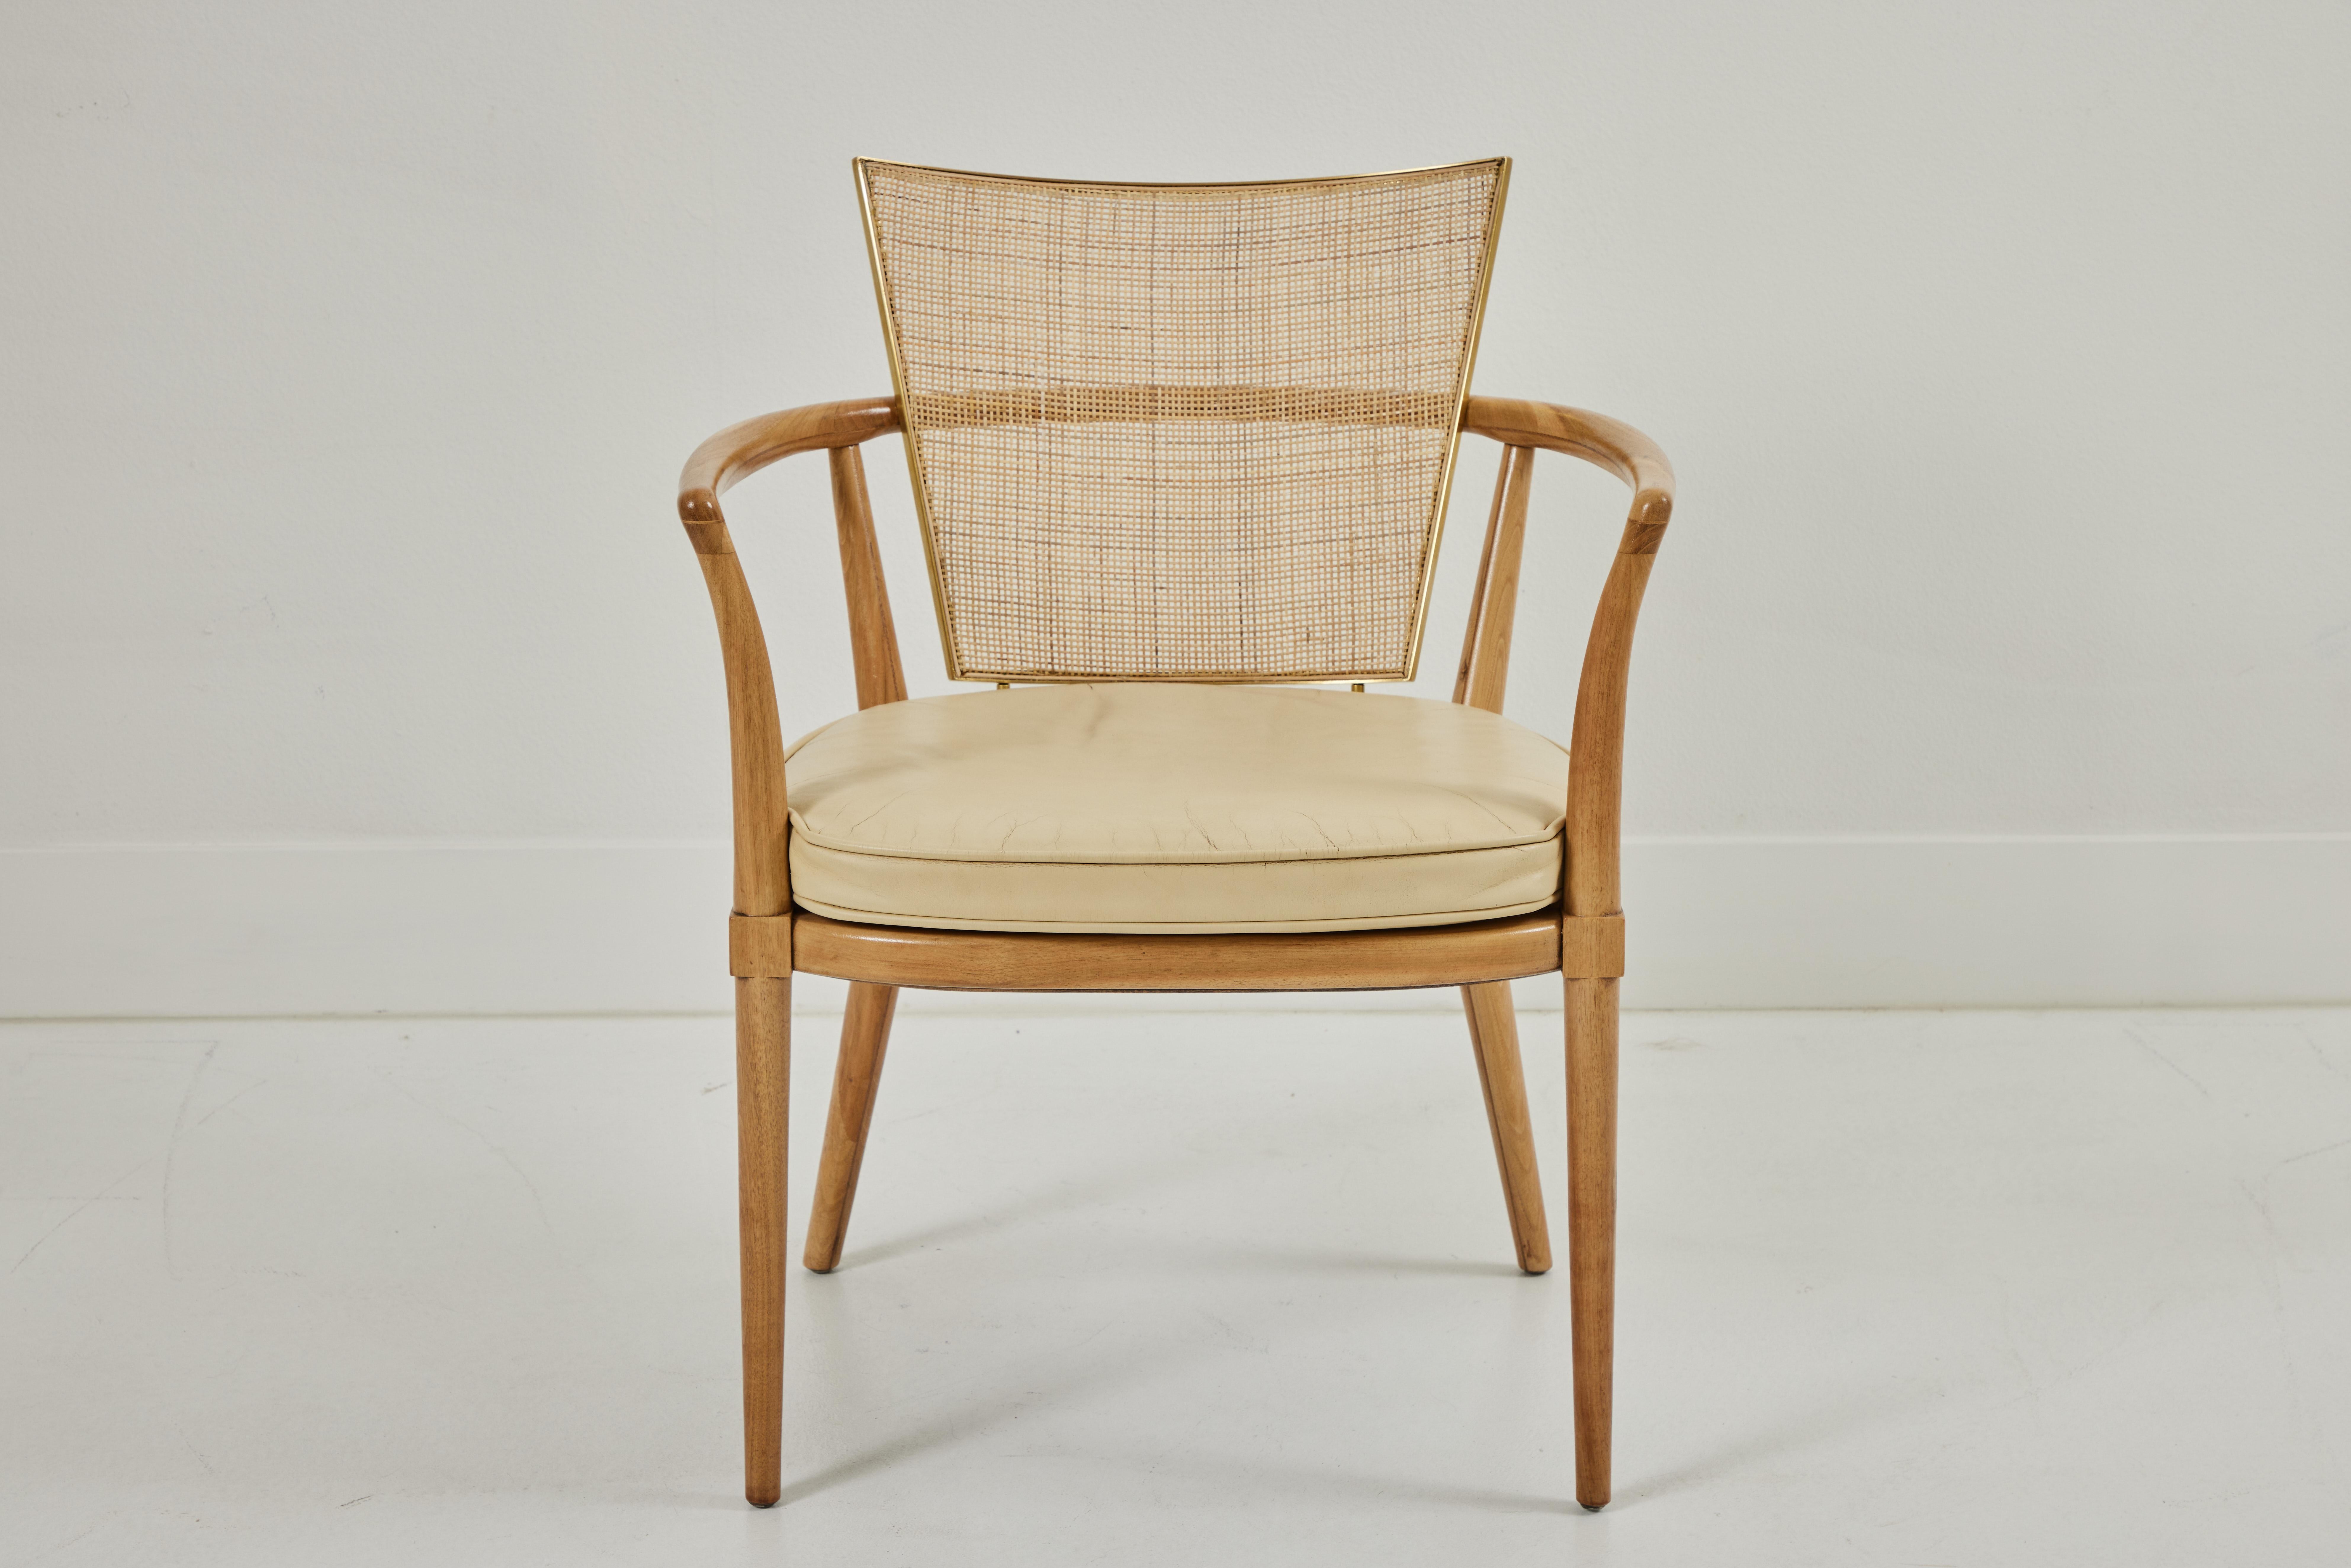 These dining chairs are bleached walnut with newly restored cane set within a brass framework. The cushions and leather upholstery are original, with a lovely patina and do reflect some age, adding to the vintage character of the chairs. The dining